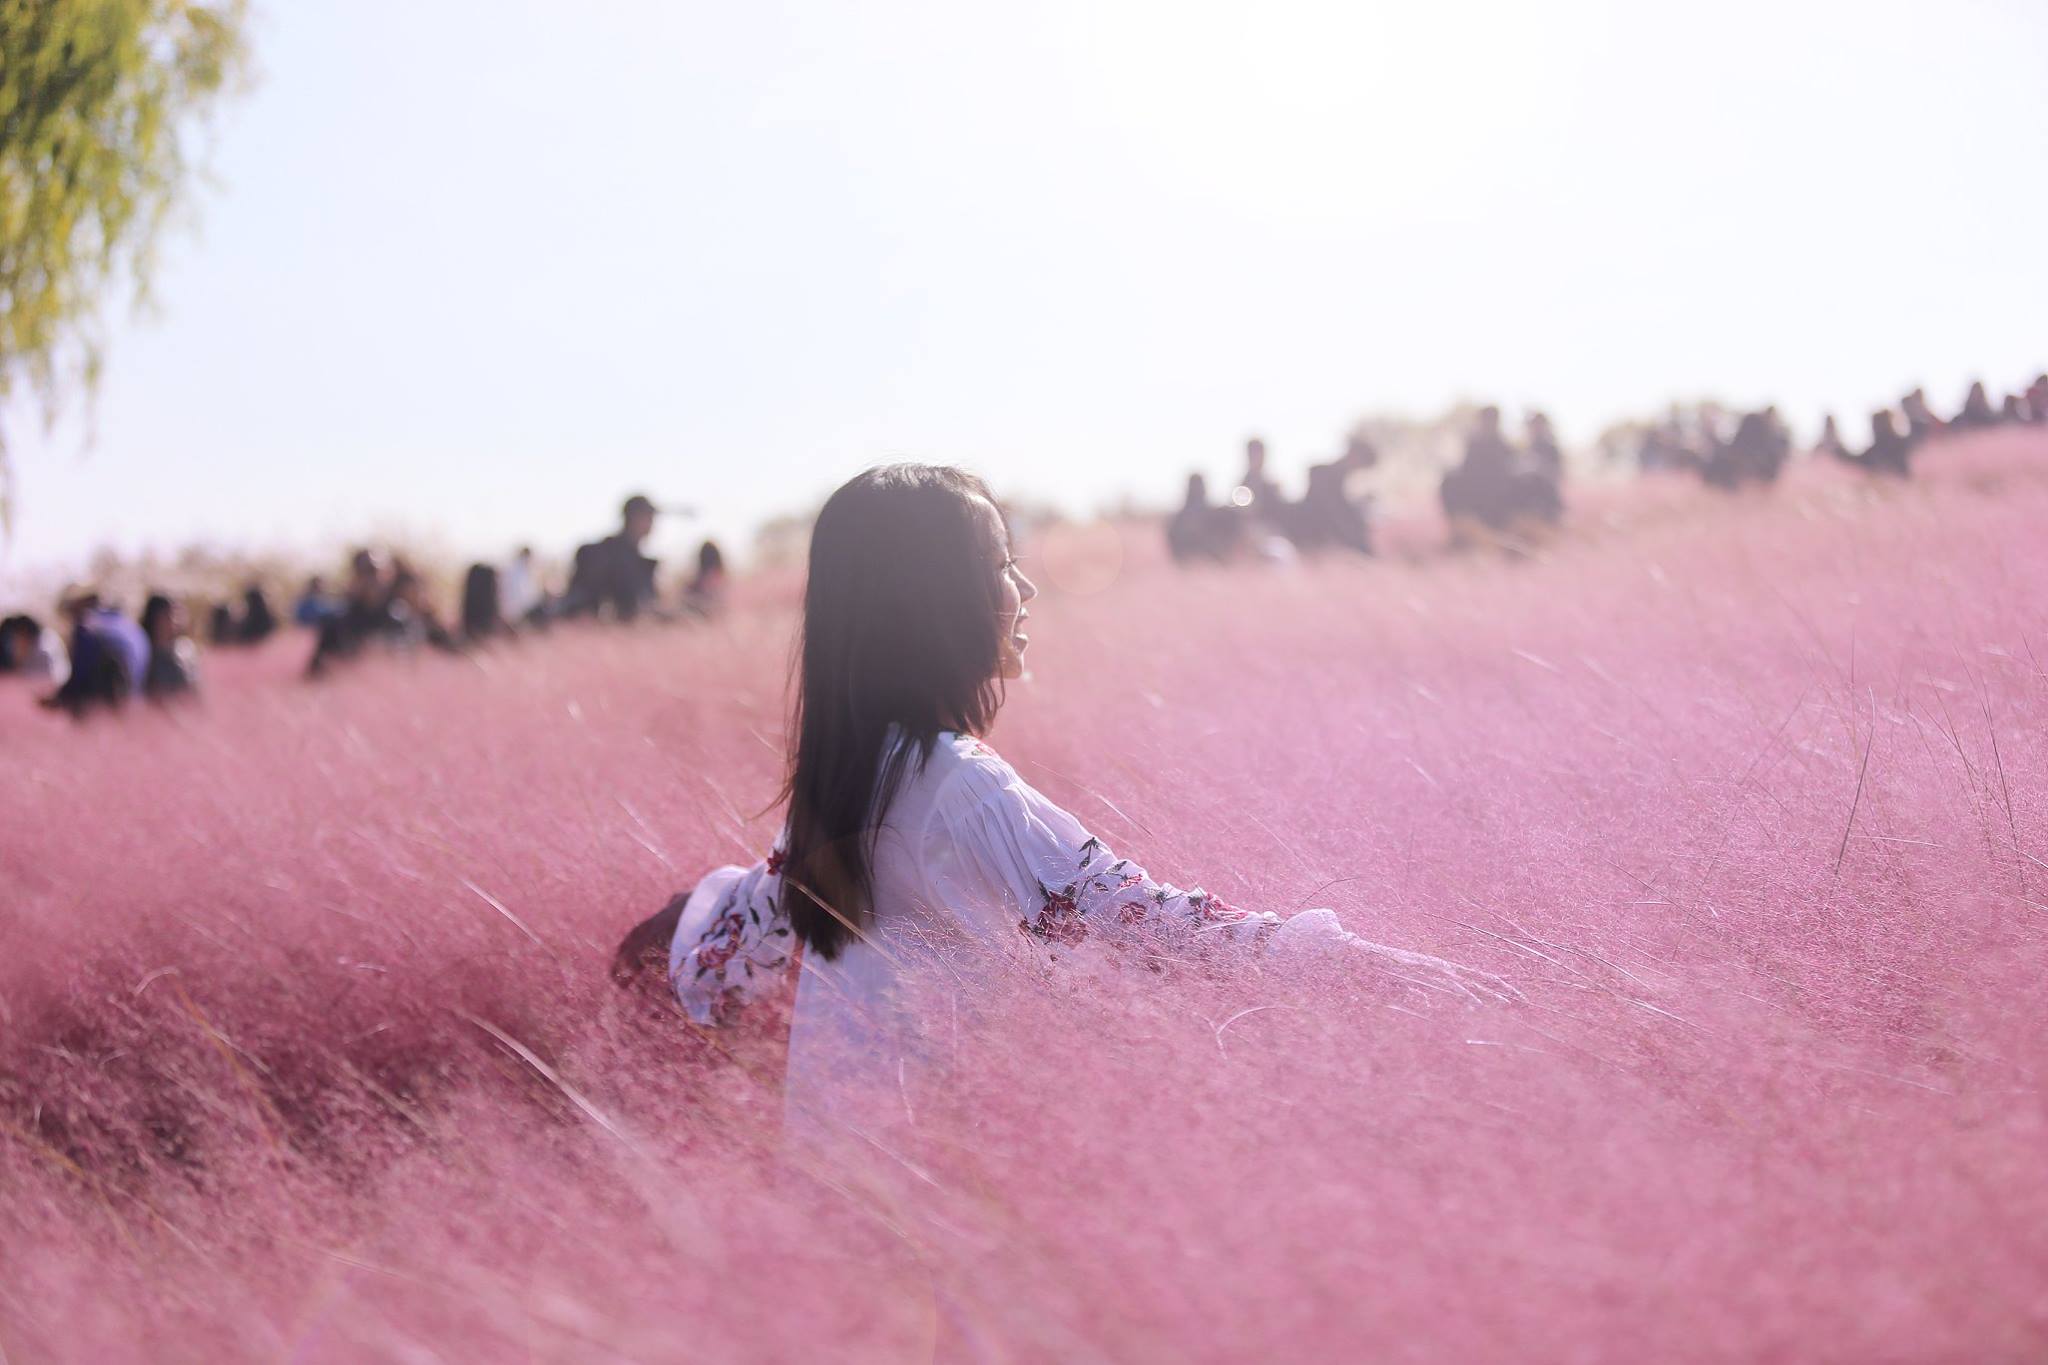 Pink Muhly Gardens becoming a new tourist attraction in Korea